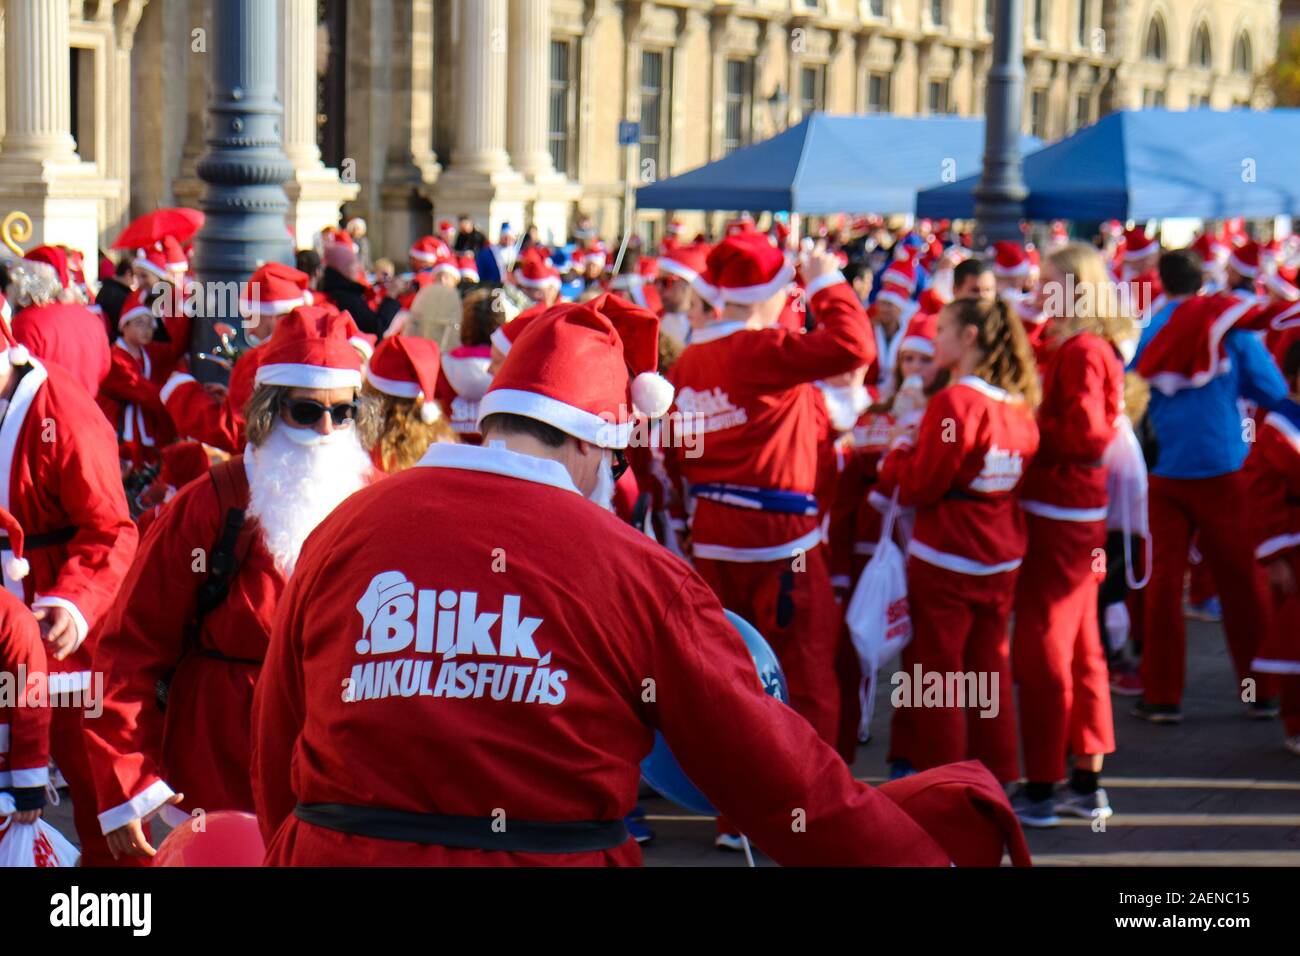 Budapest, Hungary - December 8, 2019: Participants in Santa Clause costumes  at the finishing line of the 7th Santa Claus Charity Run of Budapest,  capital of Hungary Stock Photo - Alamy